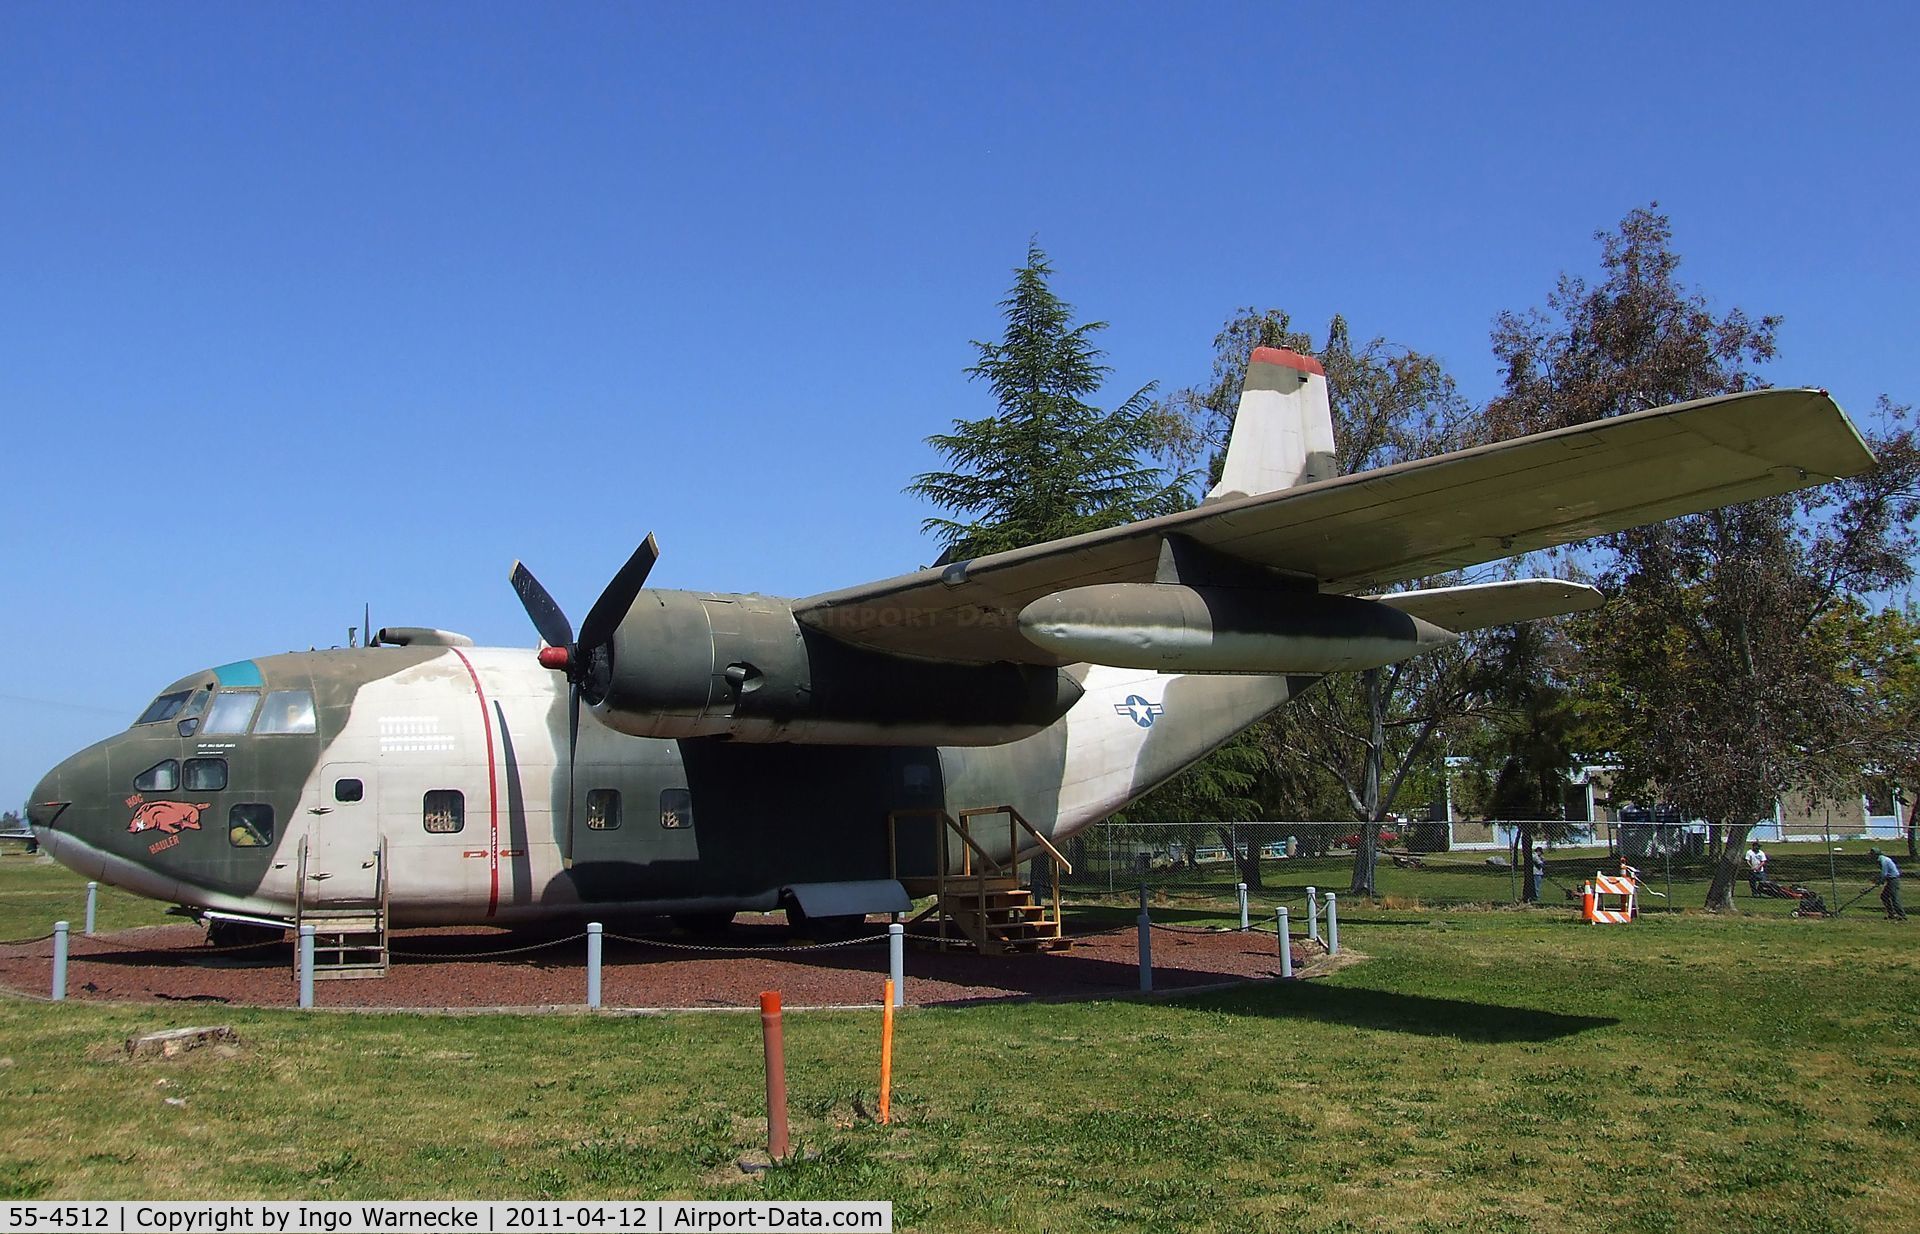 55-4512, 1955 Fairchild C-123K Provider C/N 20173, Fairchild C-123K Provider at the Castle Air Museum, Atwater CA